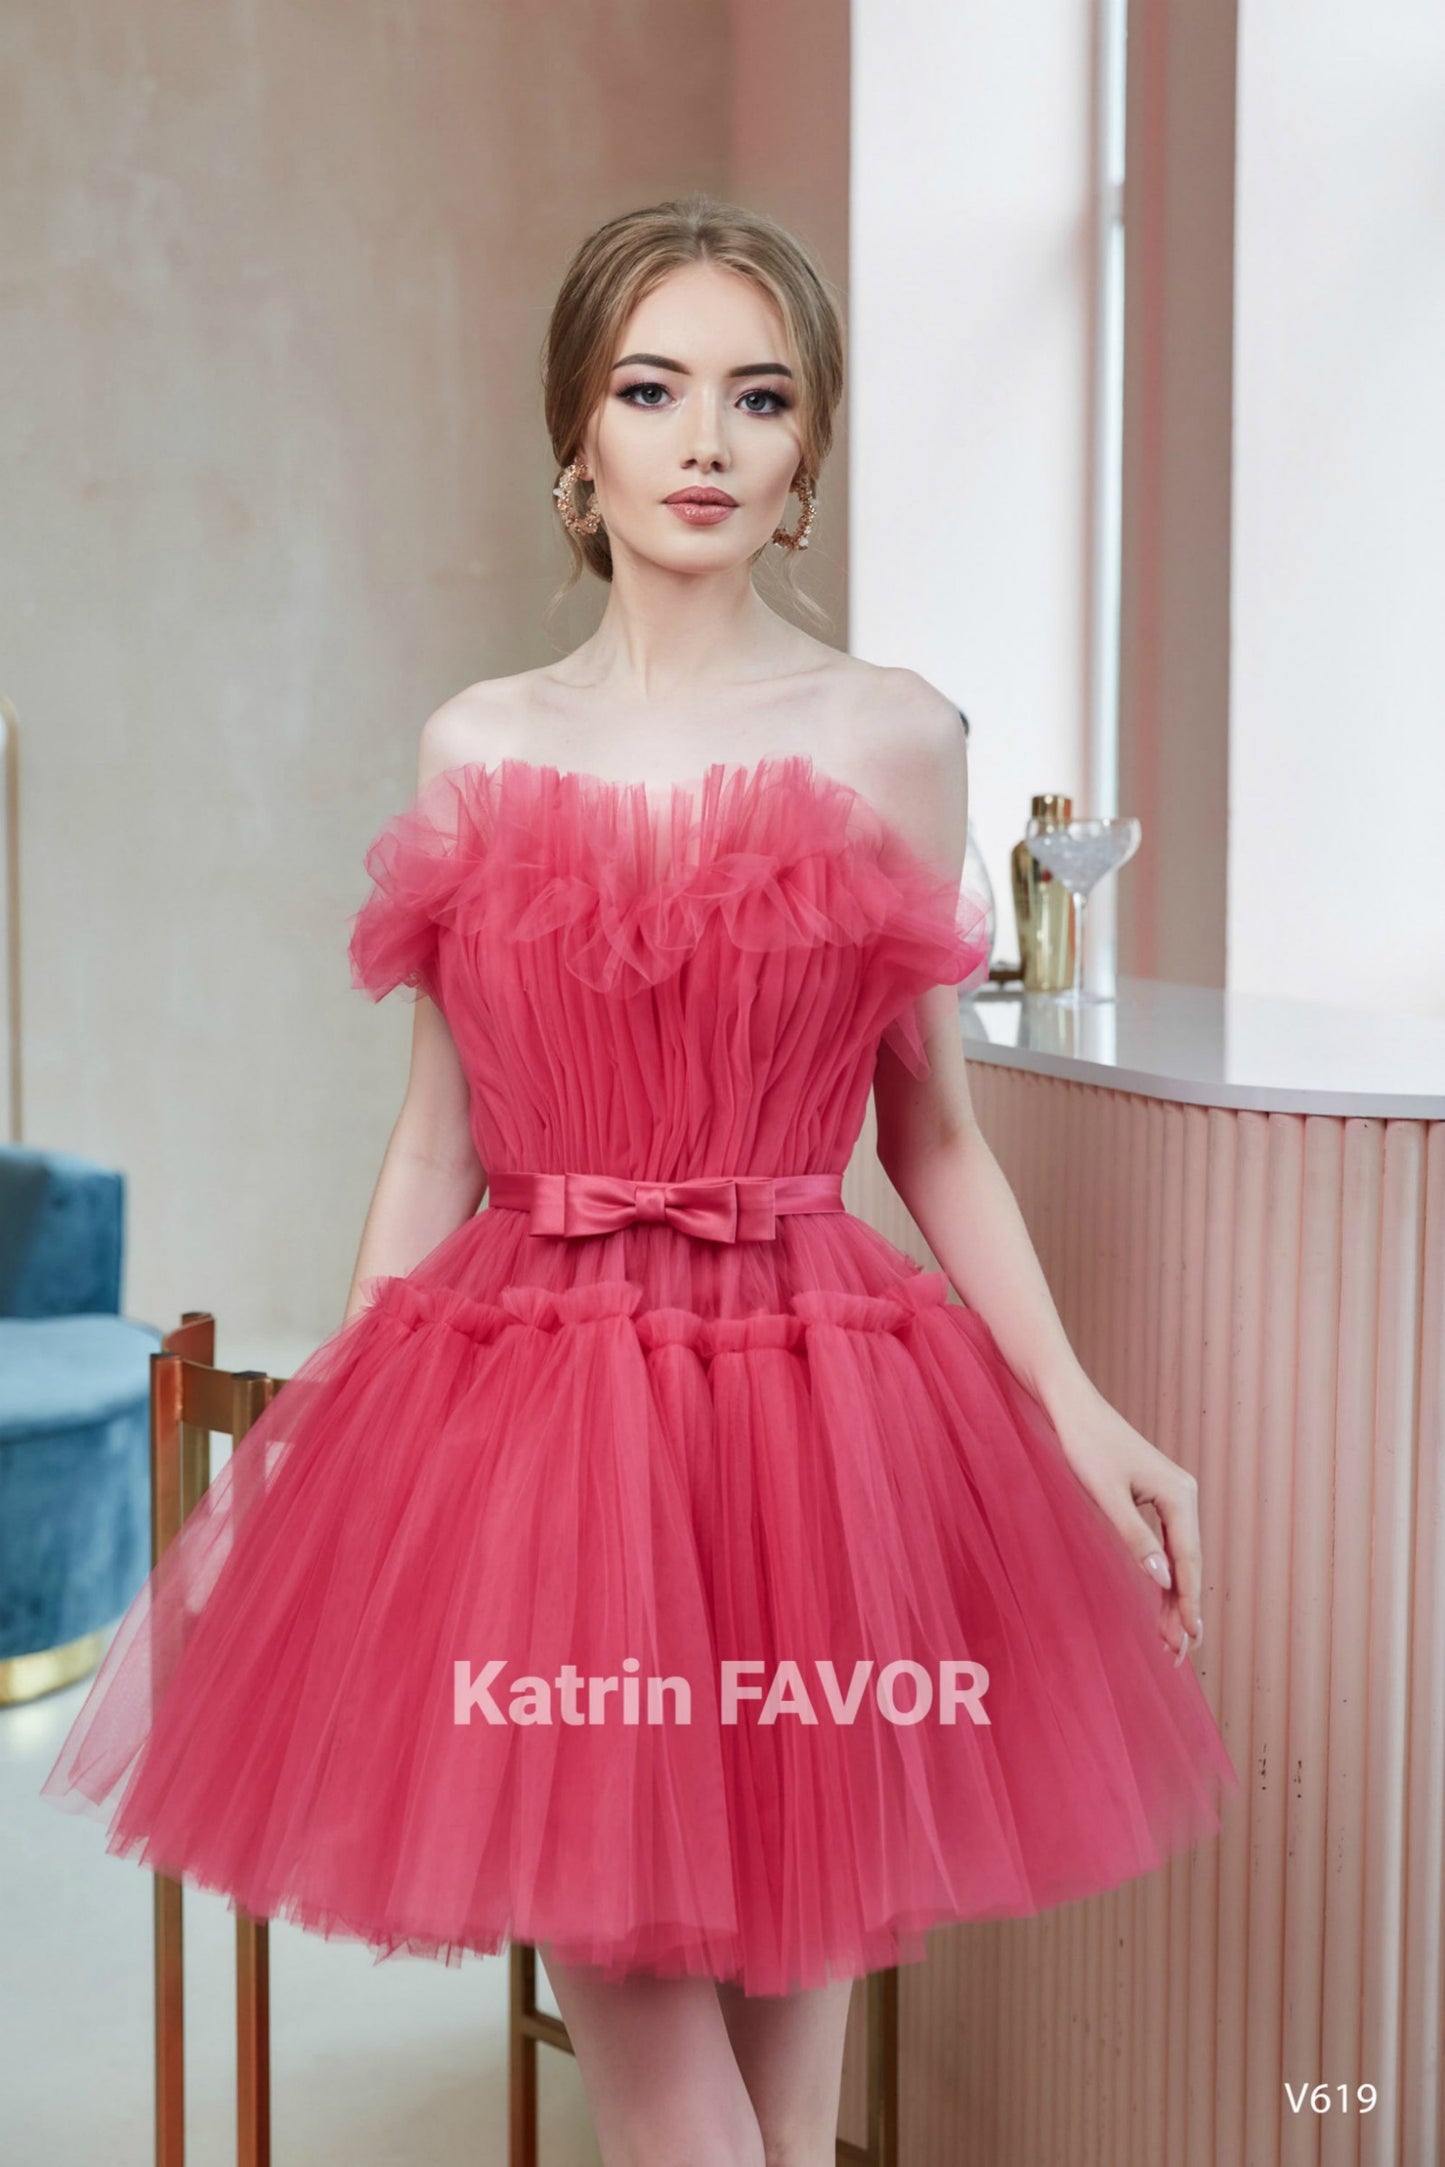 KatrinFAVORboutique-High low tulle prom dress